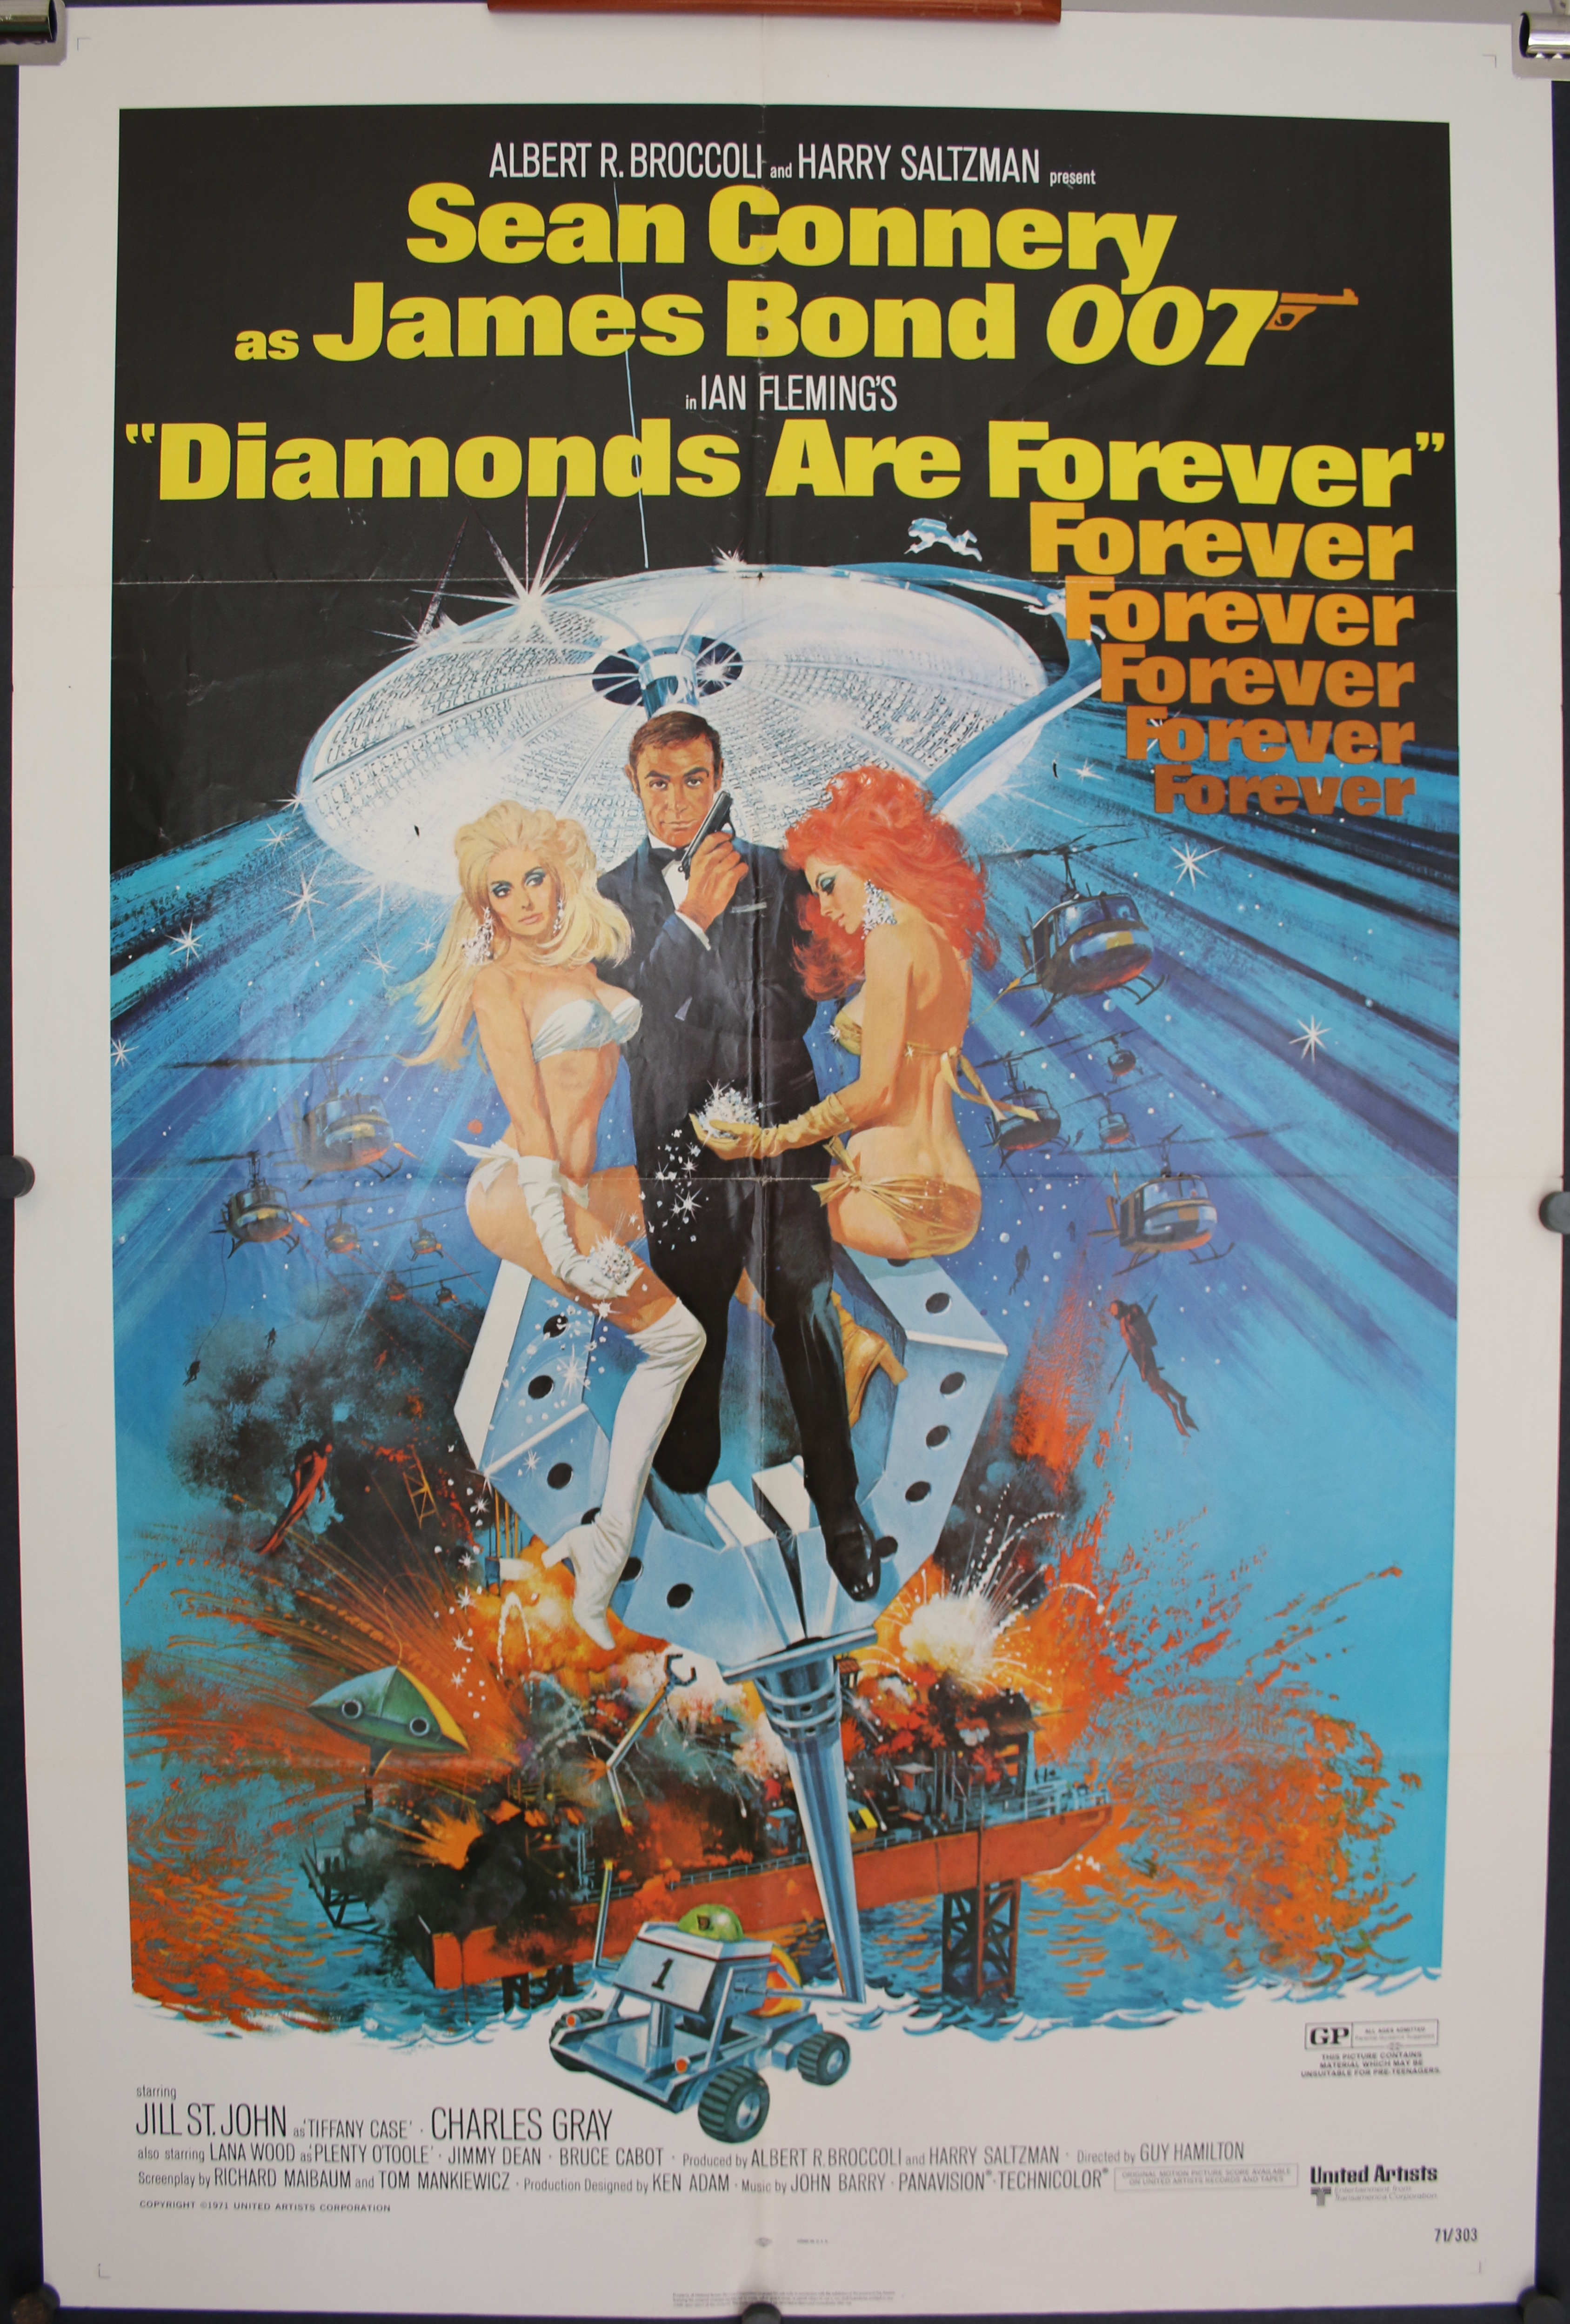 ZZ095 MOVIE POSTER Poster A0 A1 A2 A3 DIAMONDS ARE FOREVER SEAN CONNERY 007